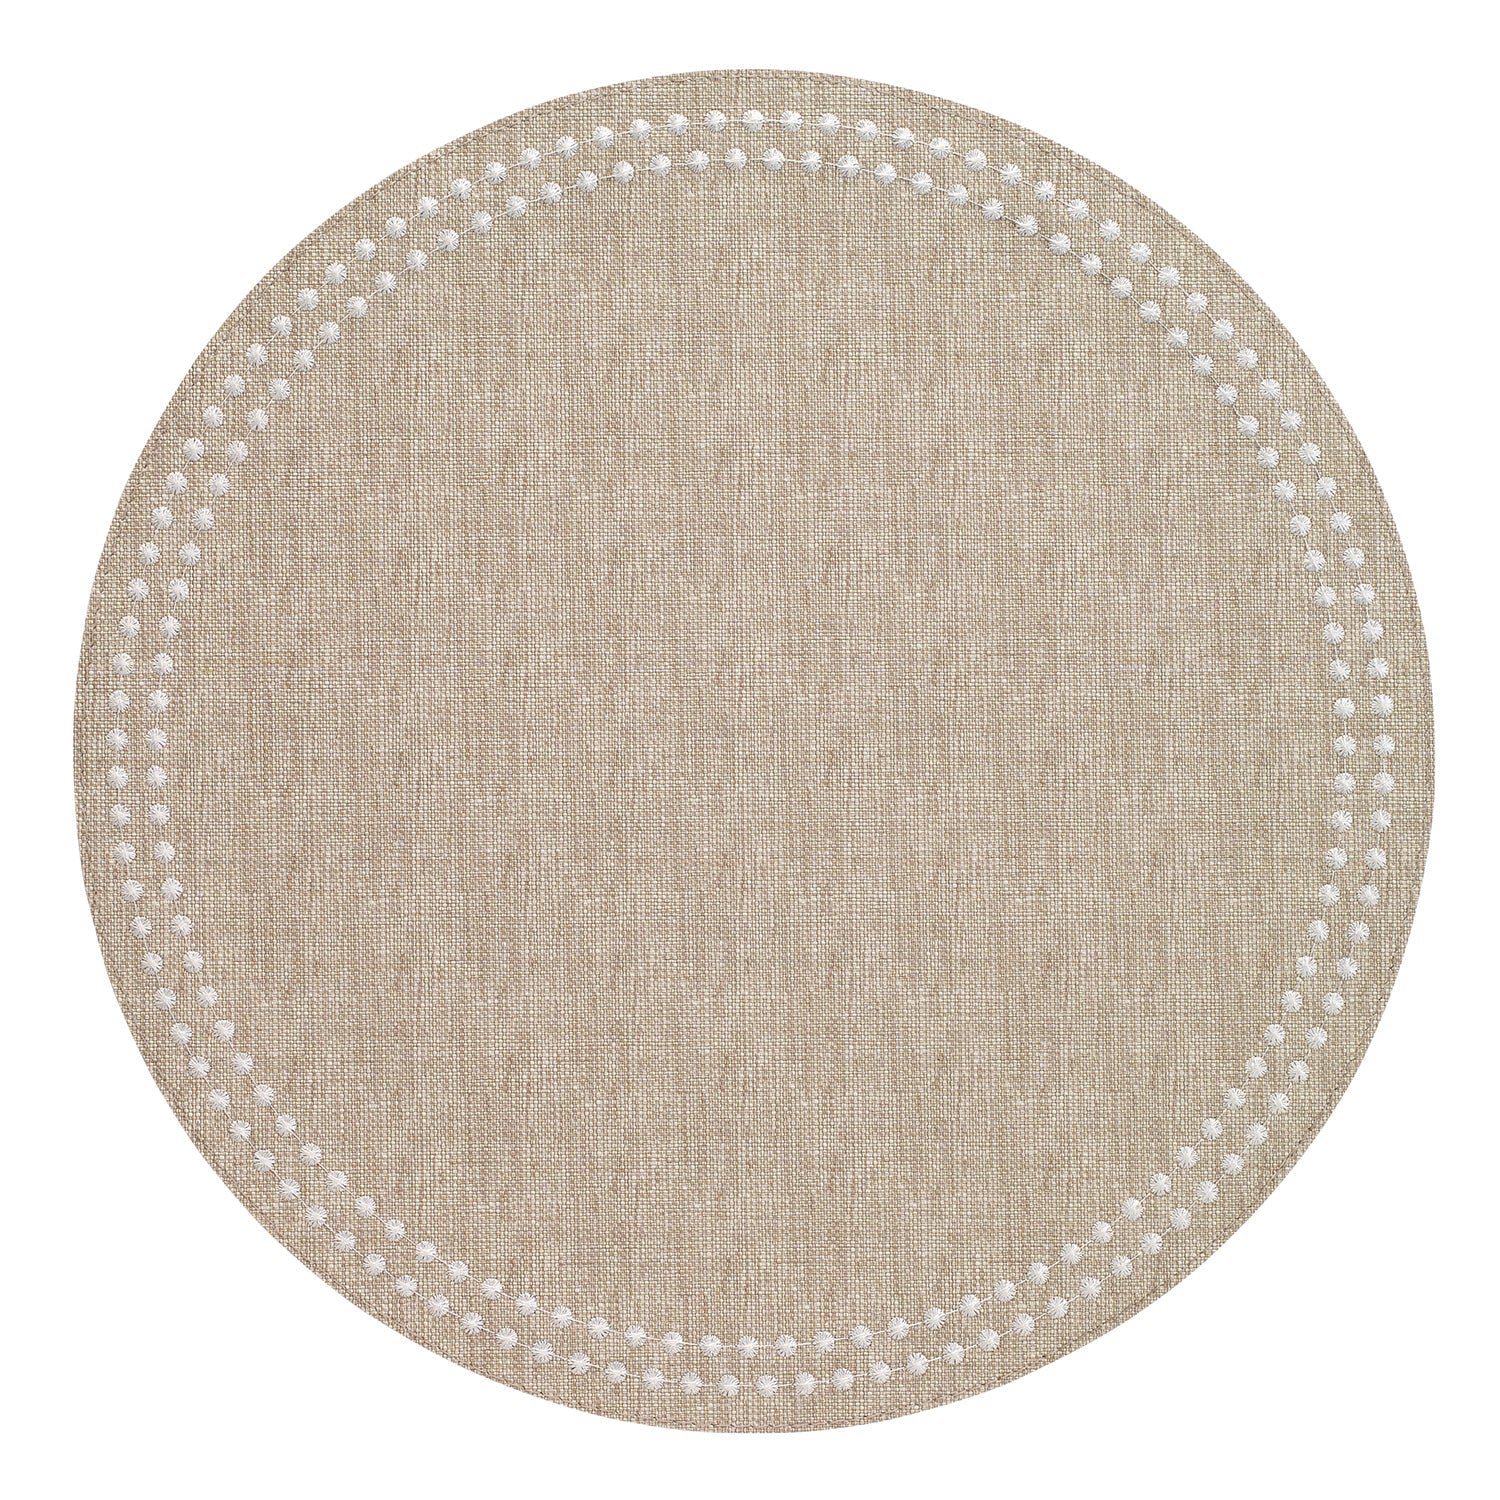 Placemats Pearls Beige White Set of 4